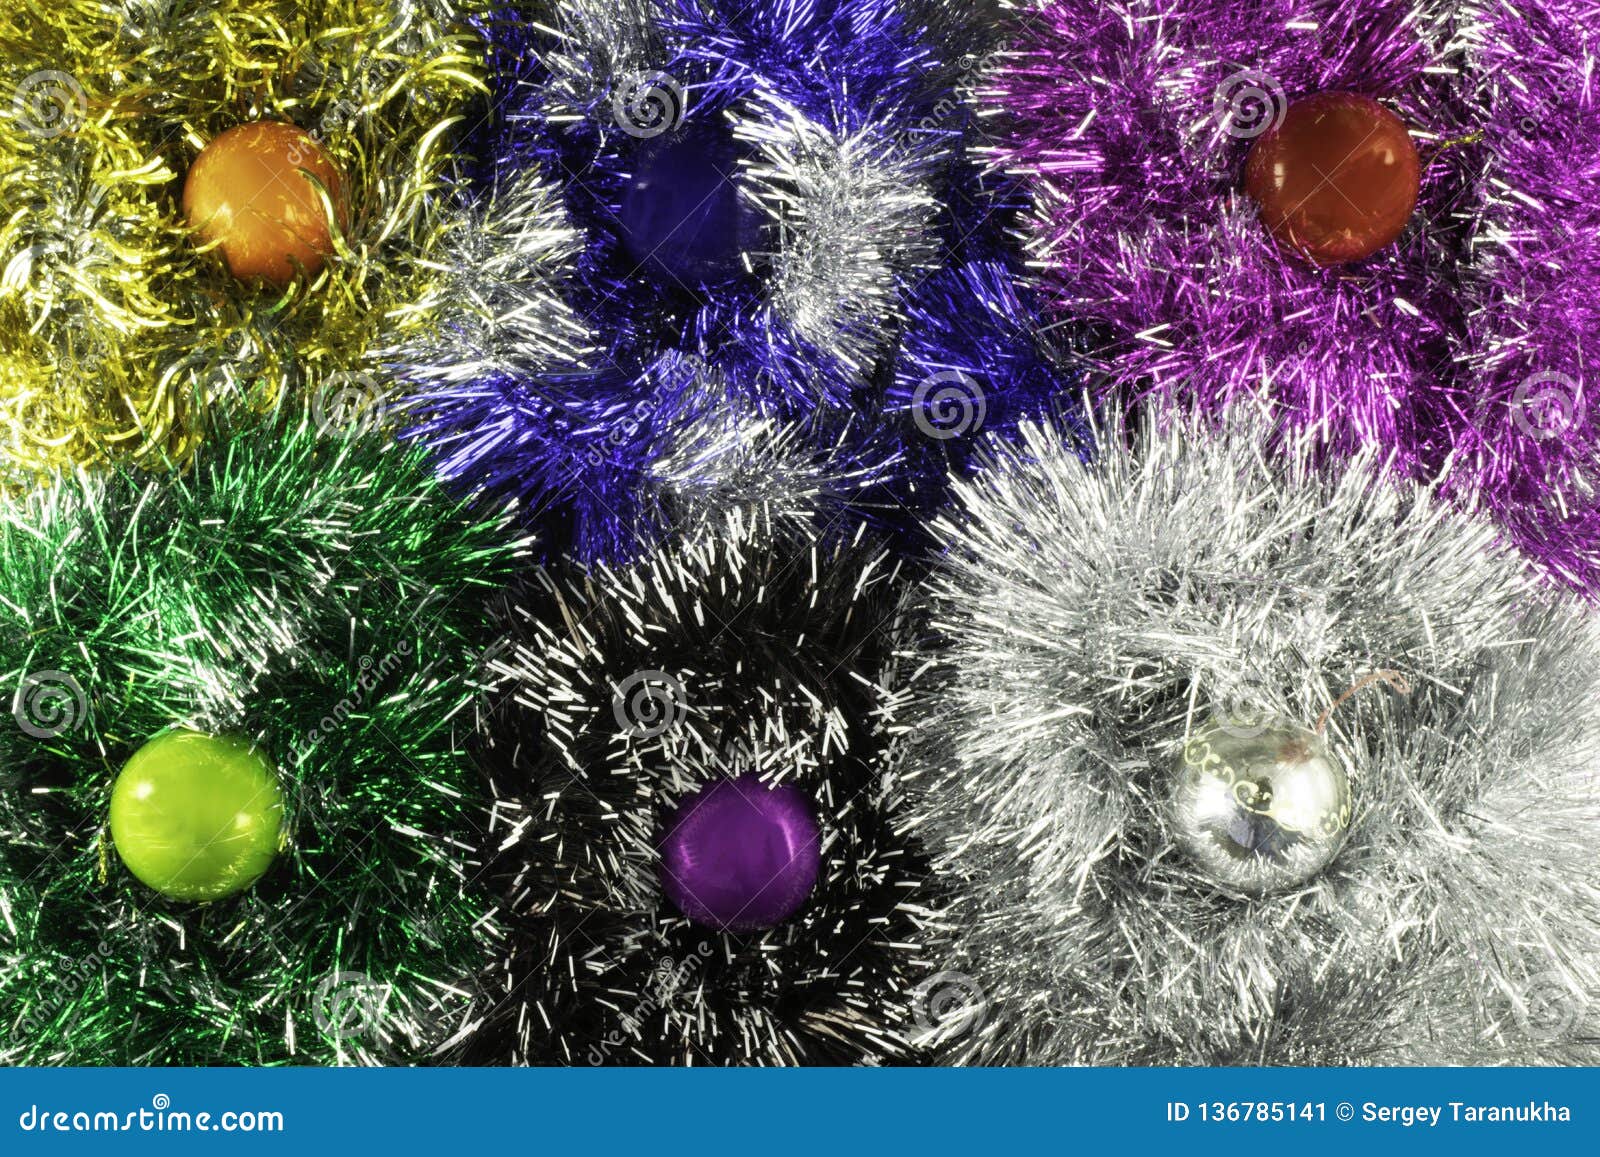 Background Made of Christmas Balls and Tinsel Stock Image - Image of ...